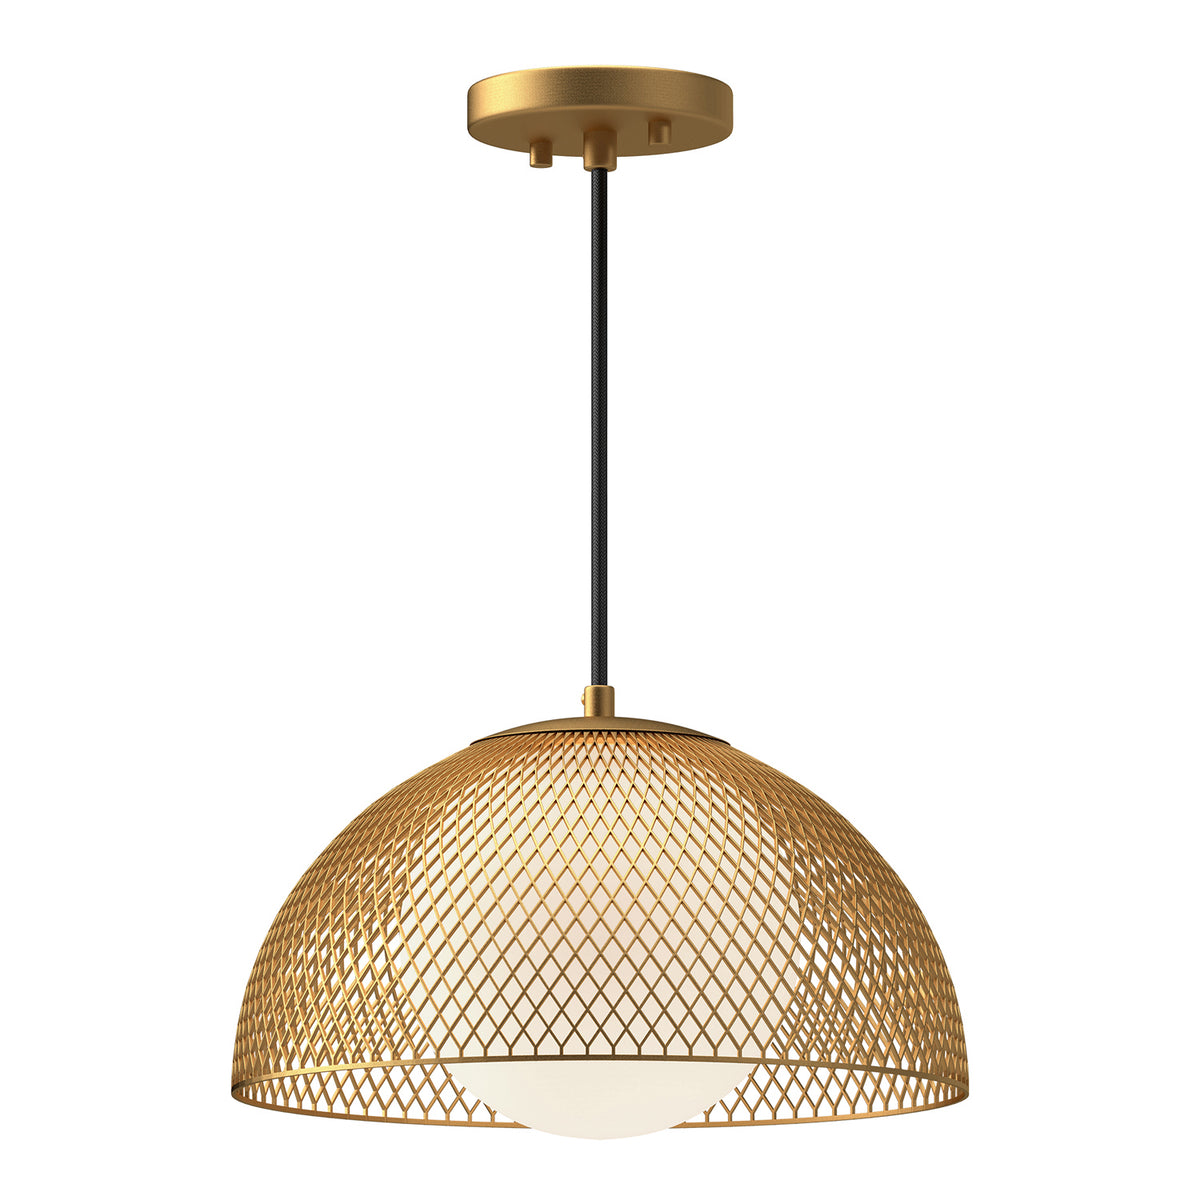 Alora One Light Pendant from the Haven collection in Gold/Opal Matte Glass|Matte Black/Opal Matte Glass finish